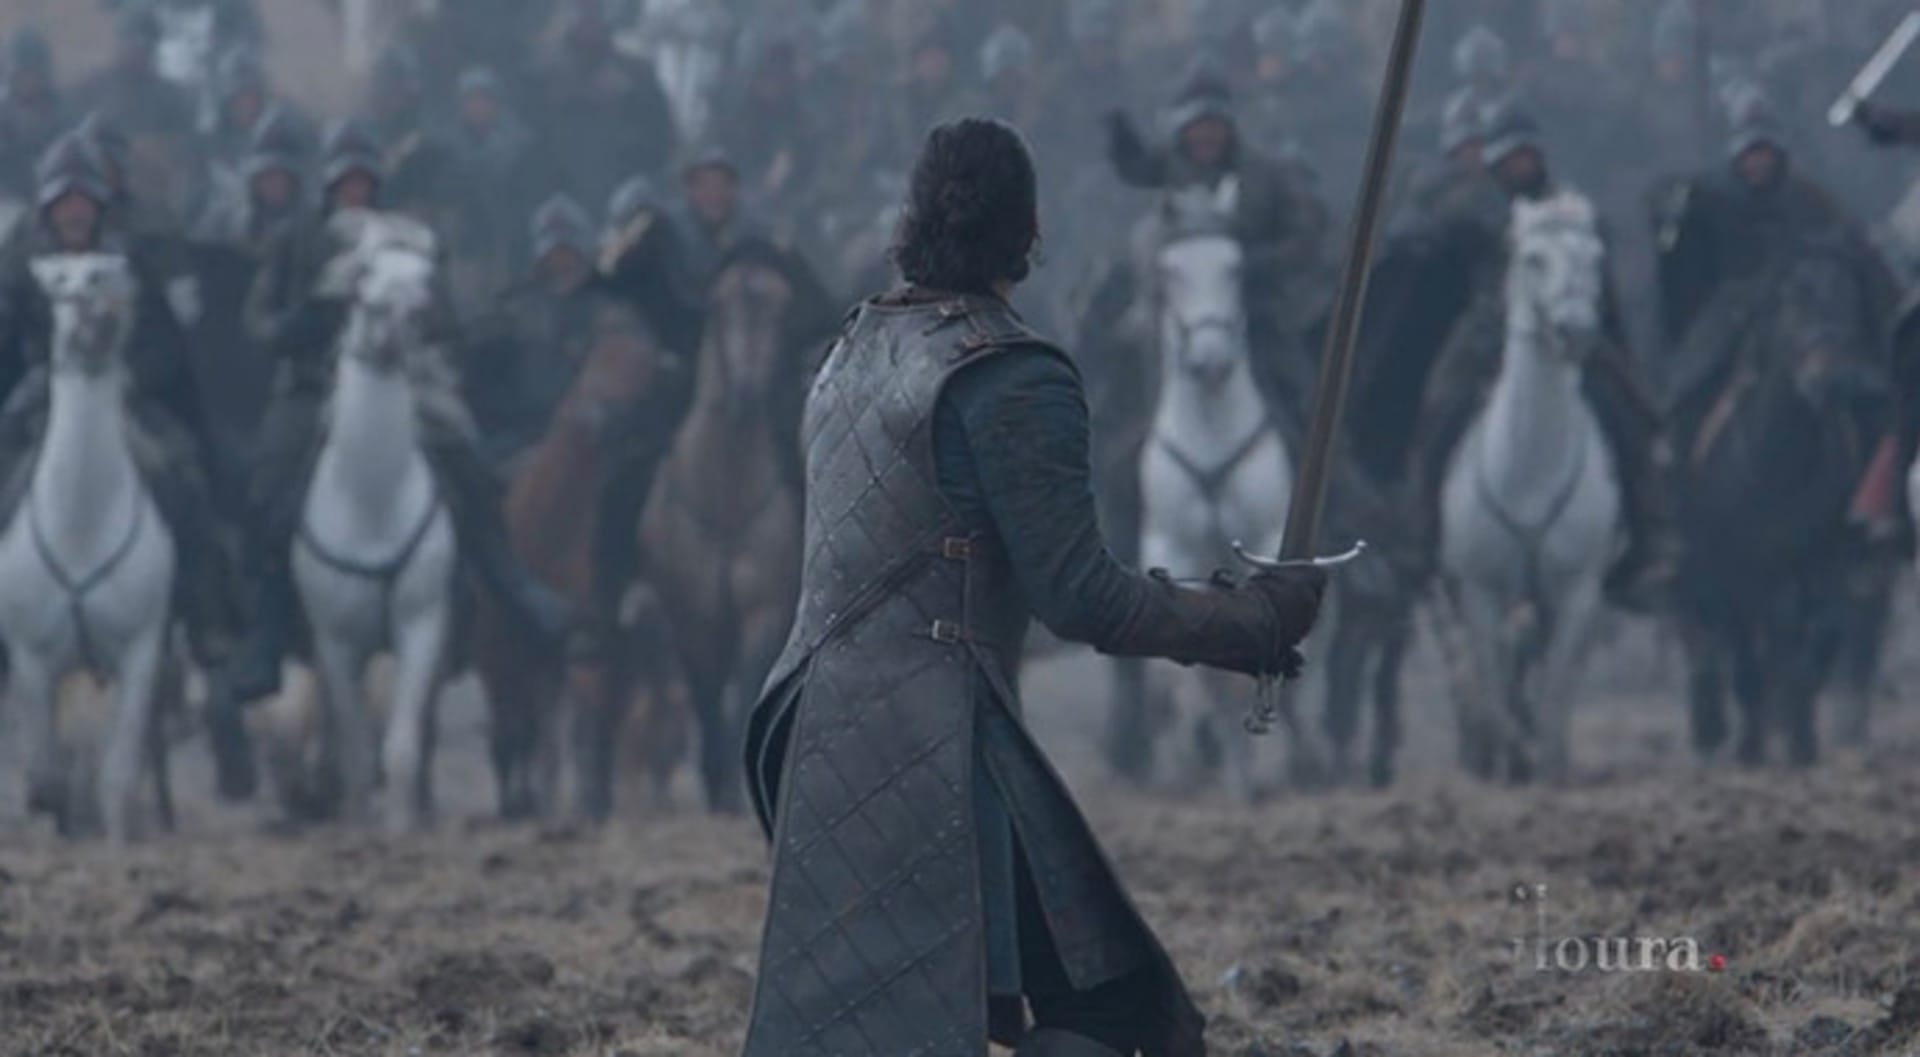 Game of Thrones' “Battle of the Bastards” scoops VFX Emmy. Chaos